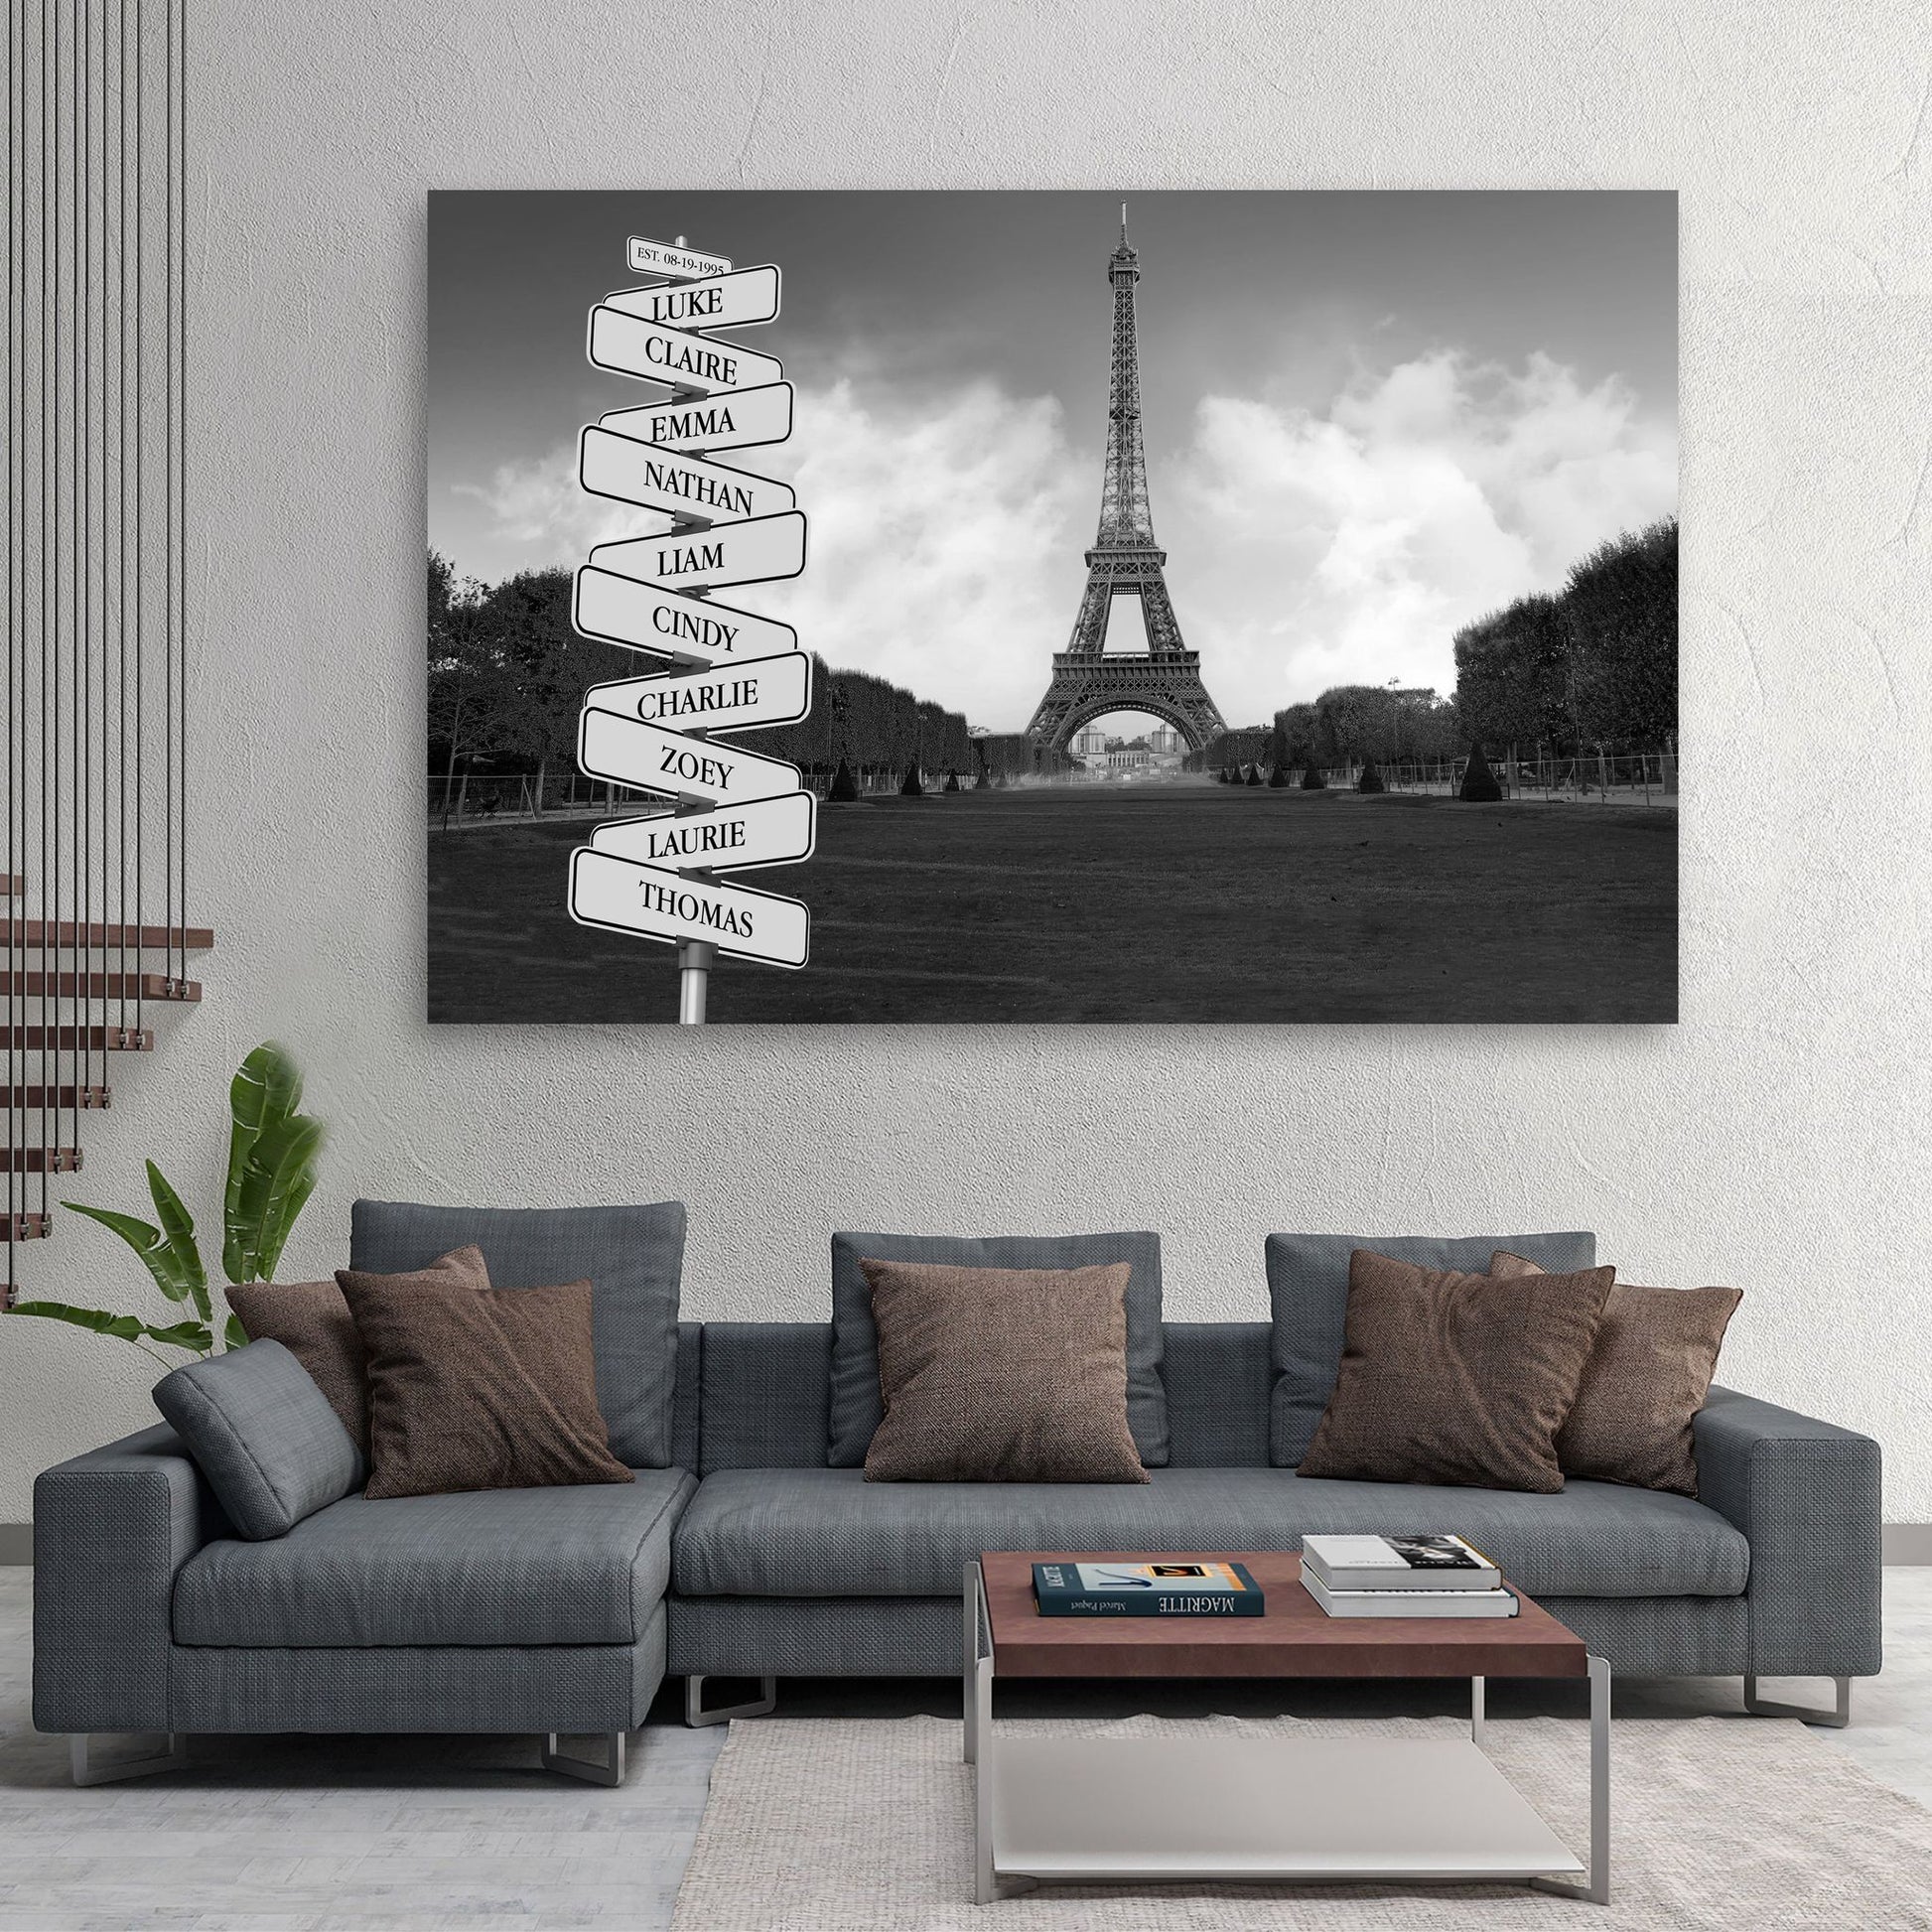 Paris Eiffel Tower Names Signs Family Canvas Wall Decor - AmourPrints